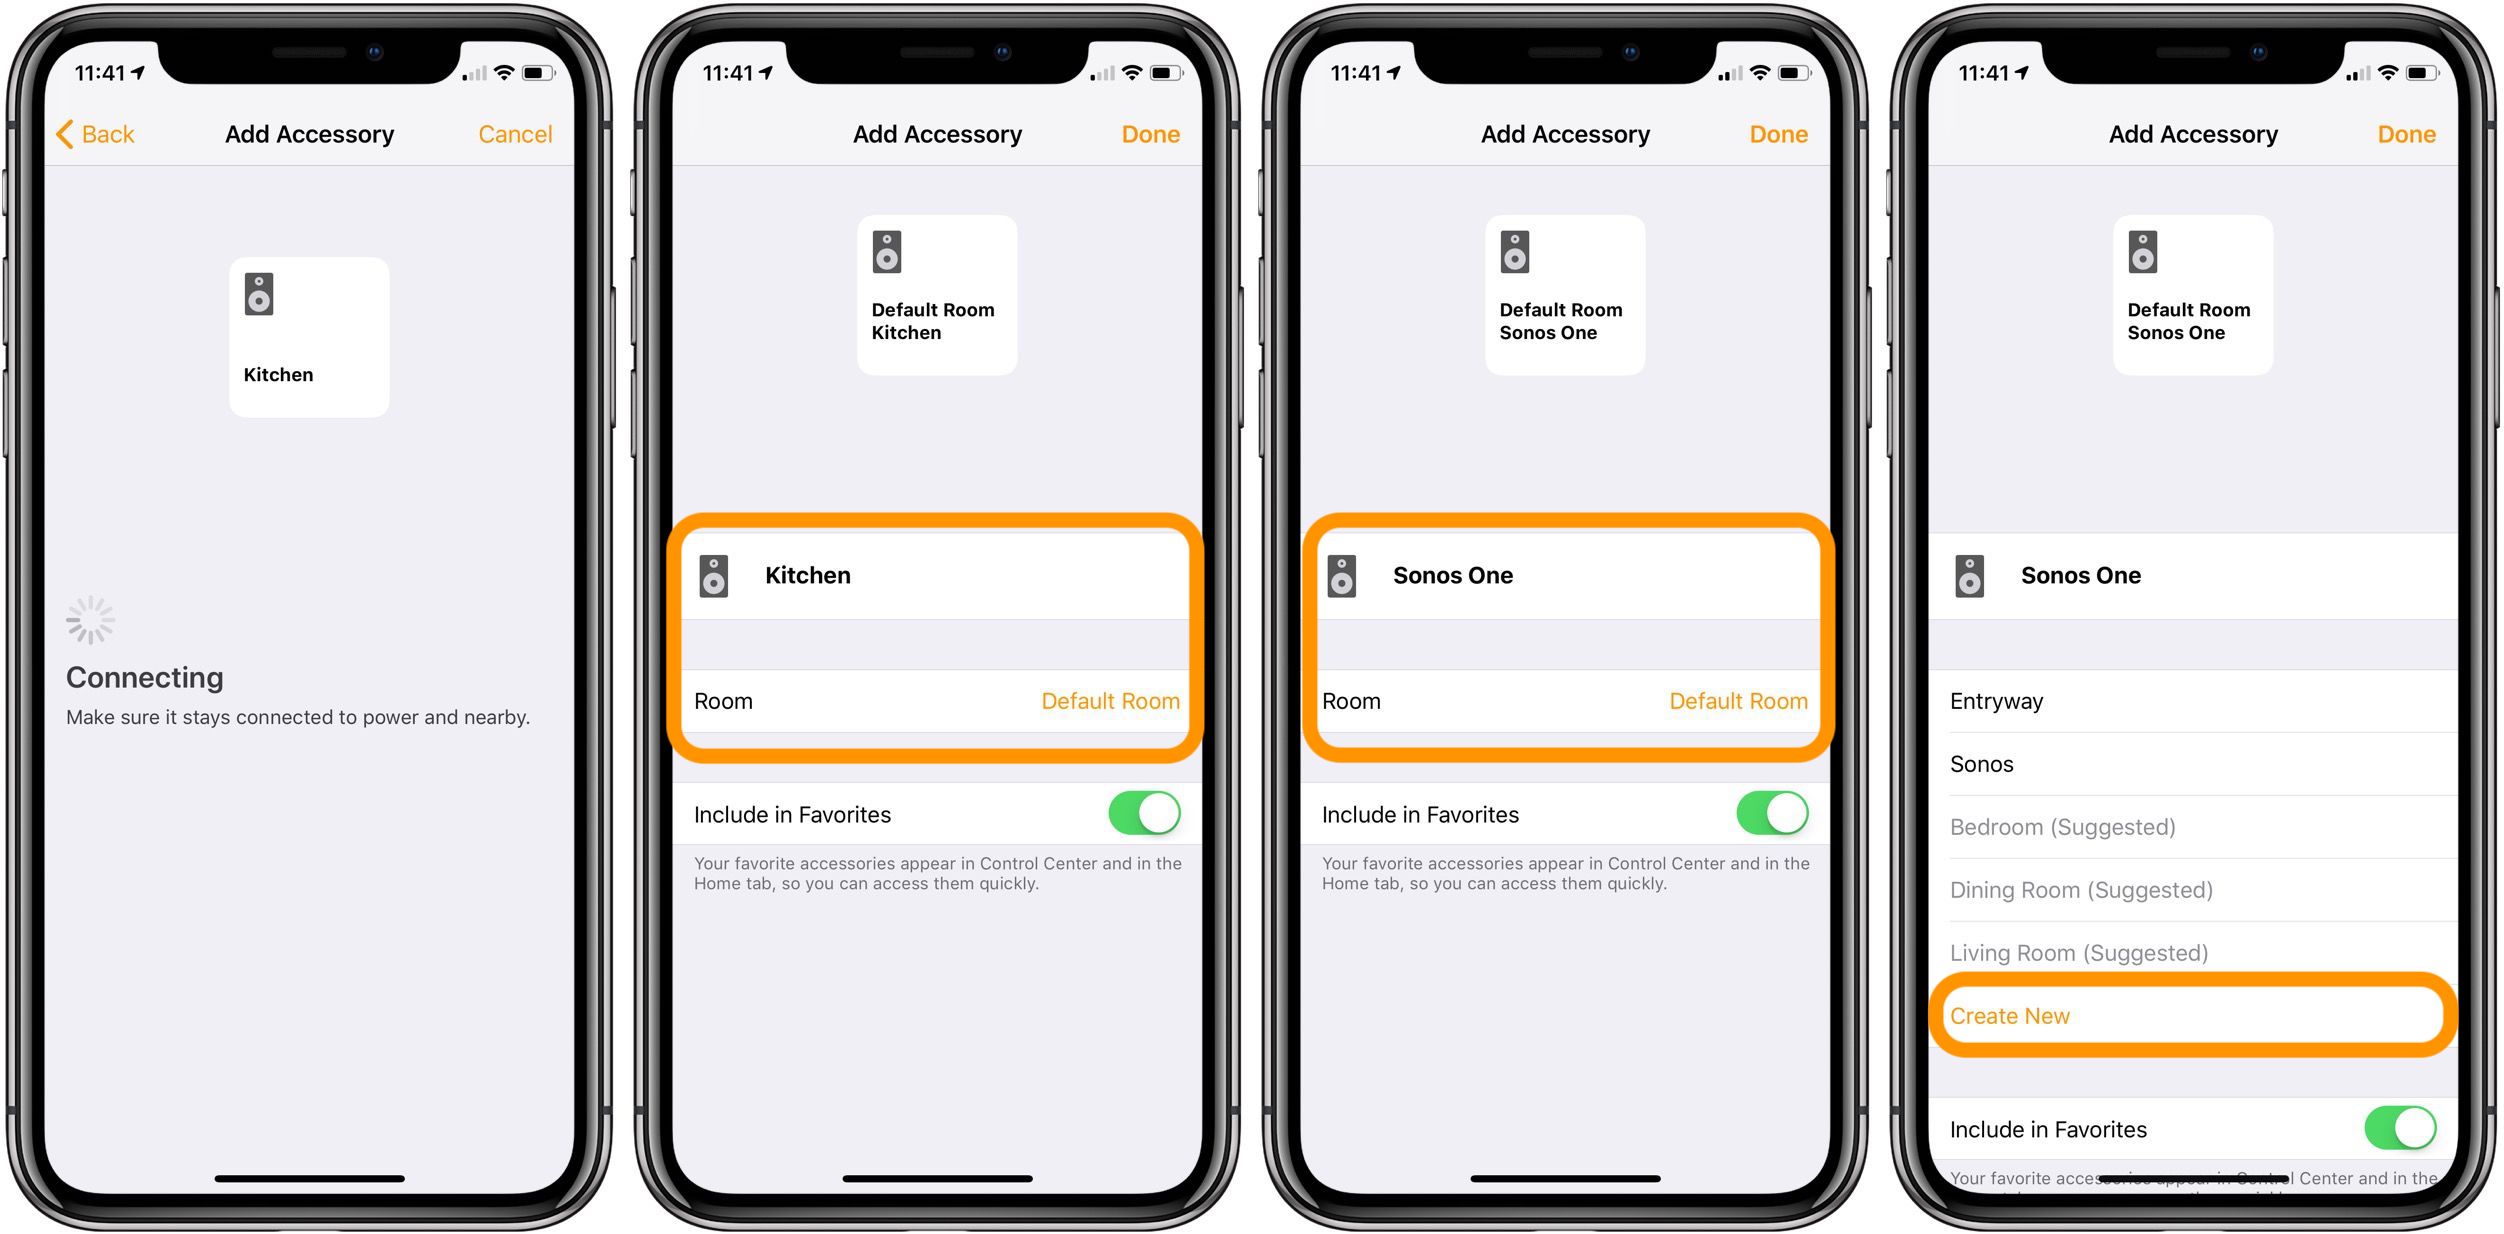 Skuldre på skuldrene Fjernelse tab How to update Sonos speakers for AirPlay 2 and HomeKit - 9to5Mac